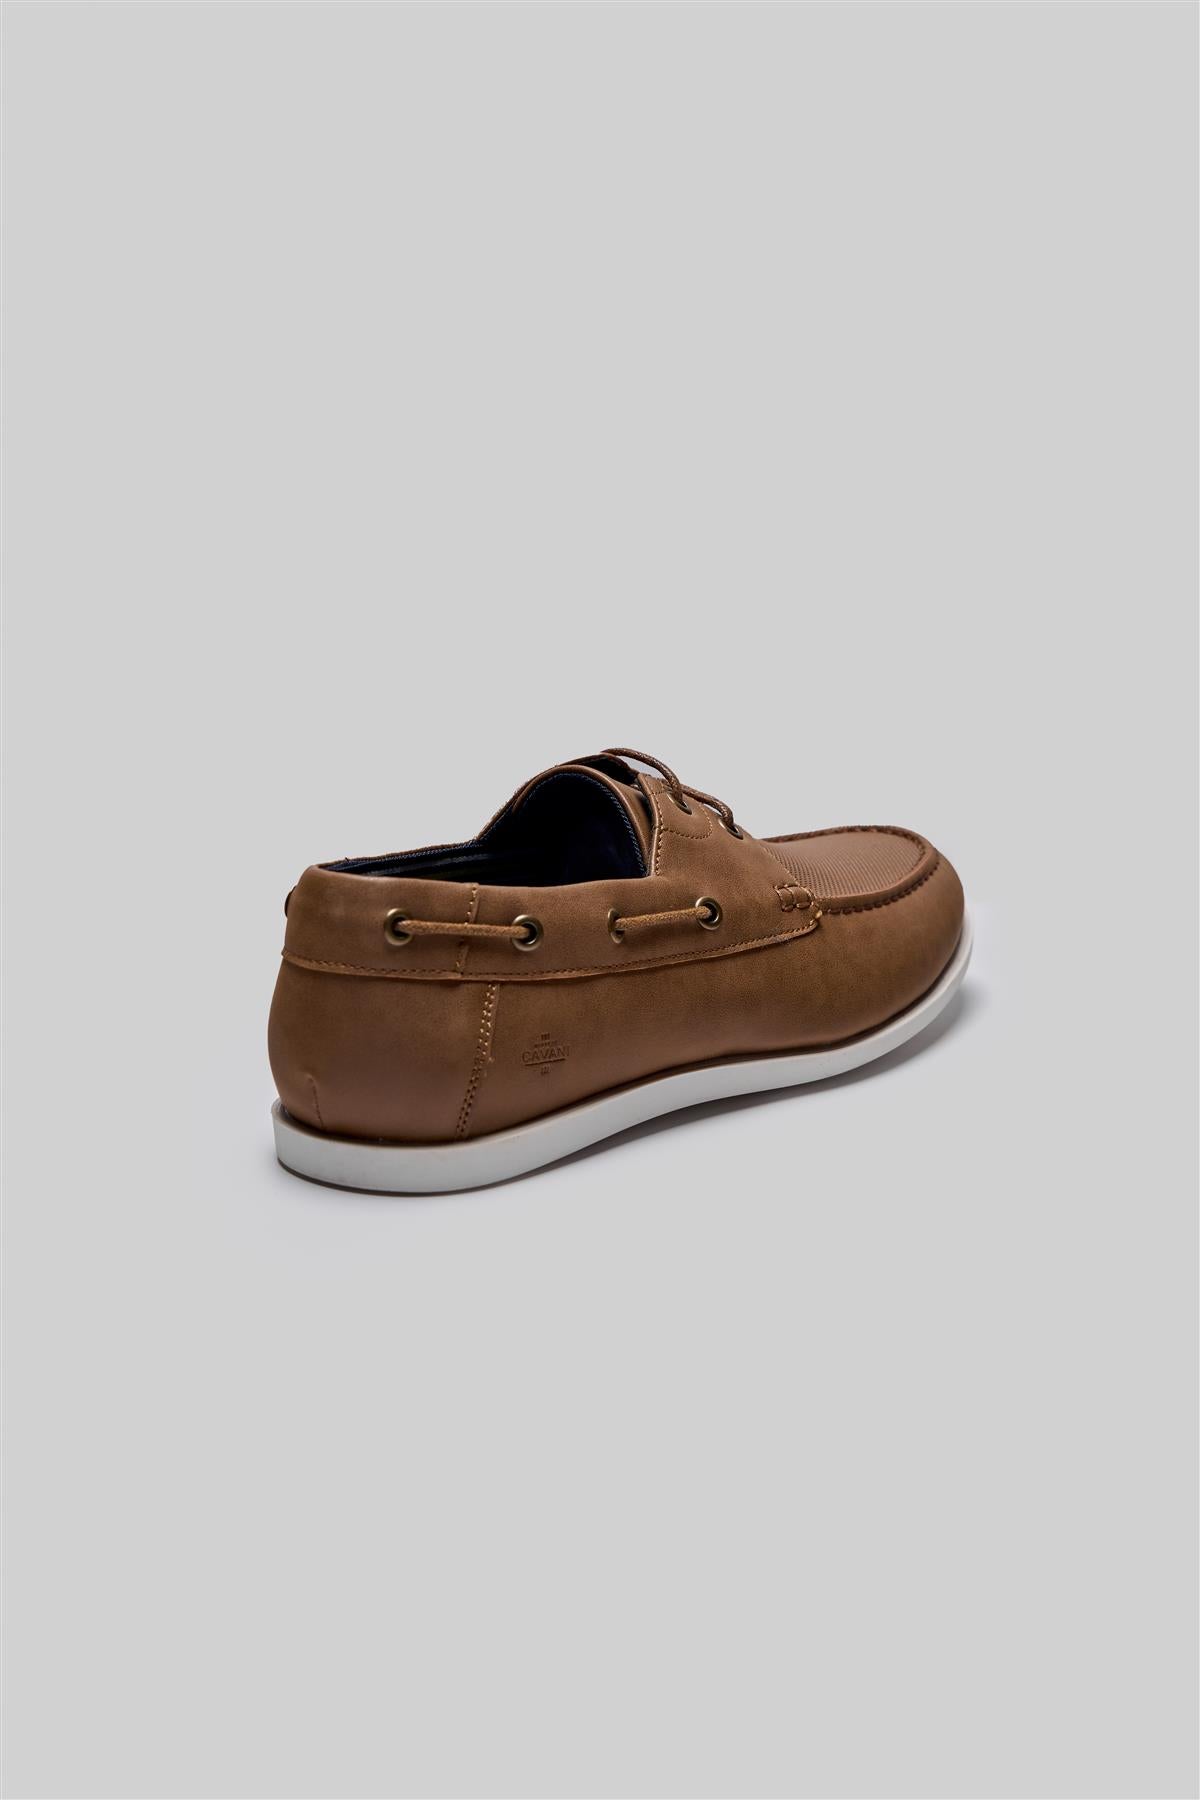 Andros Tan Shoes